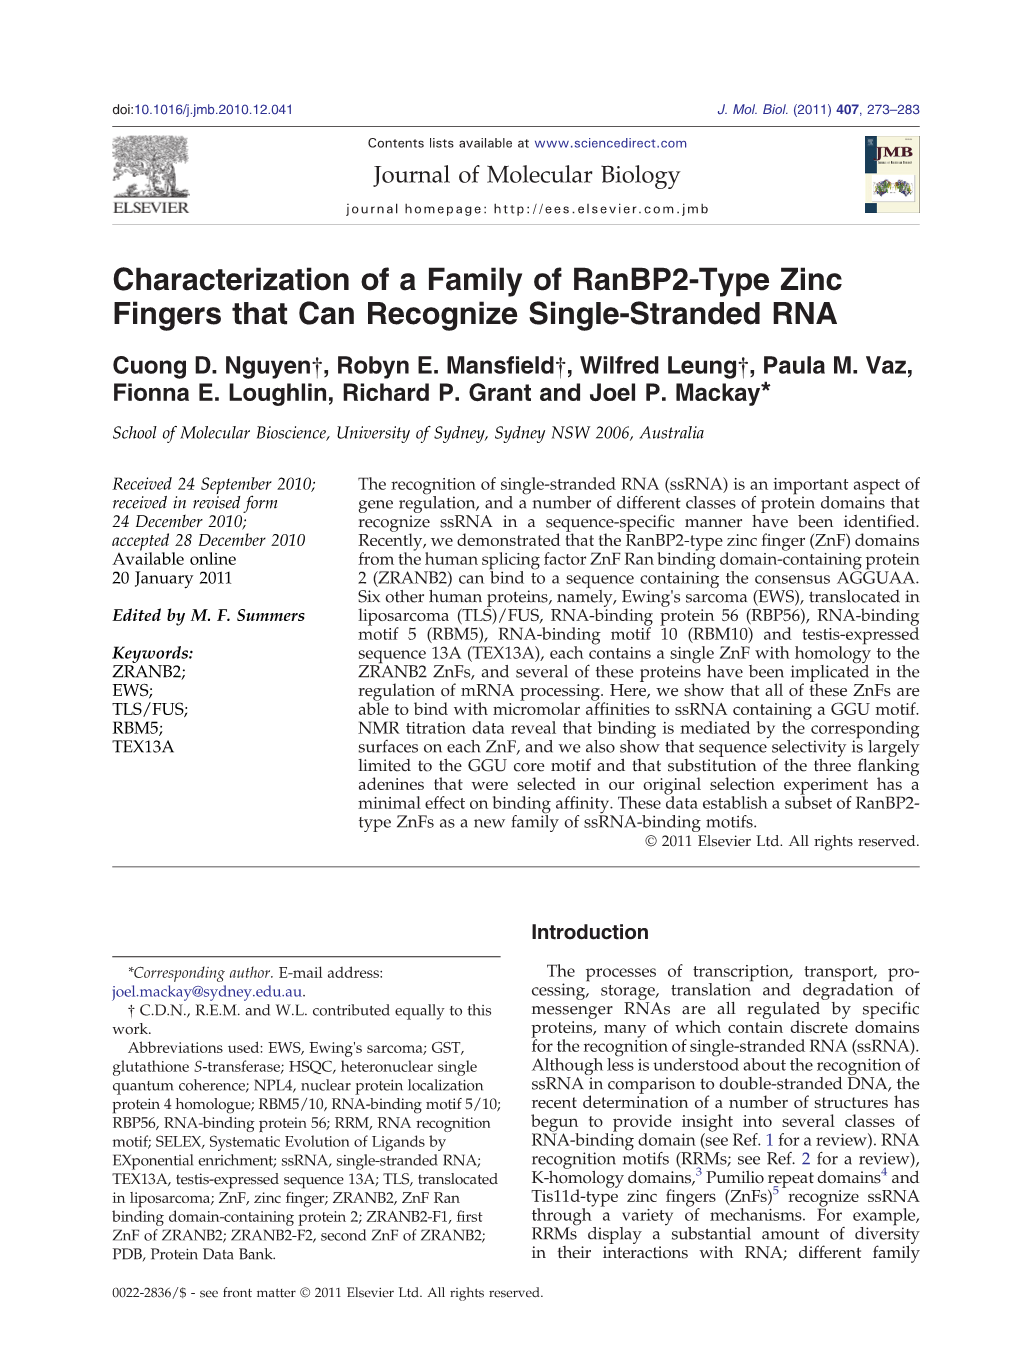 Characterization of a Family of Ranbp2-Type Zinc Fingers That Can Recognize Single-Stranded RNA